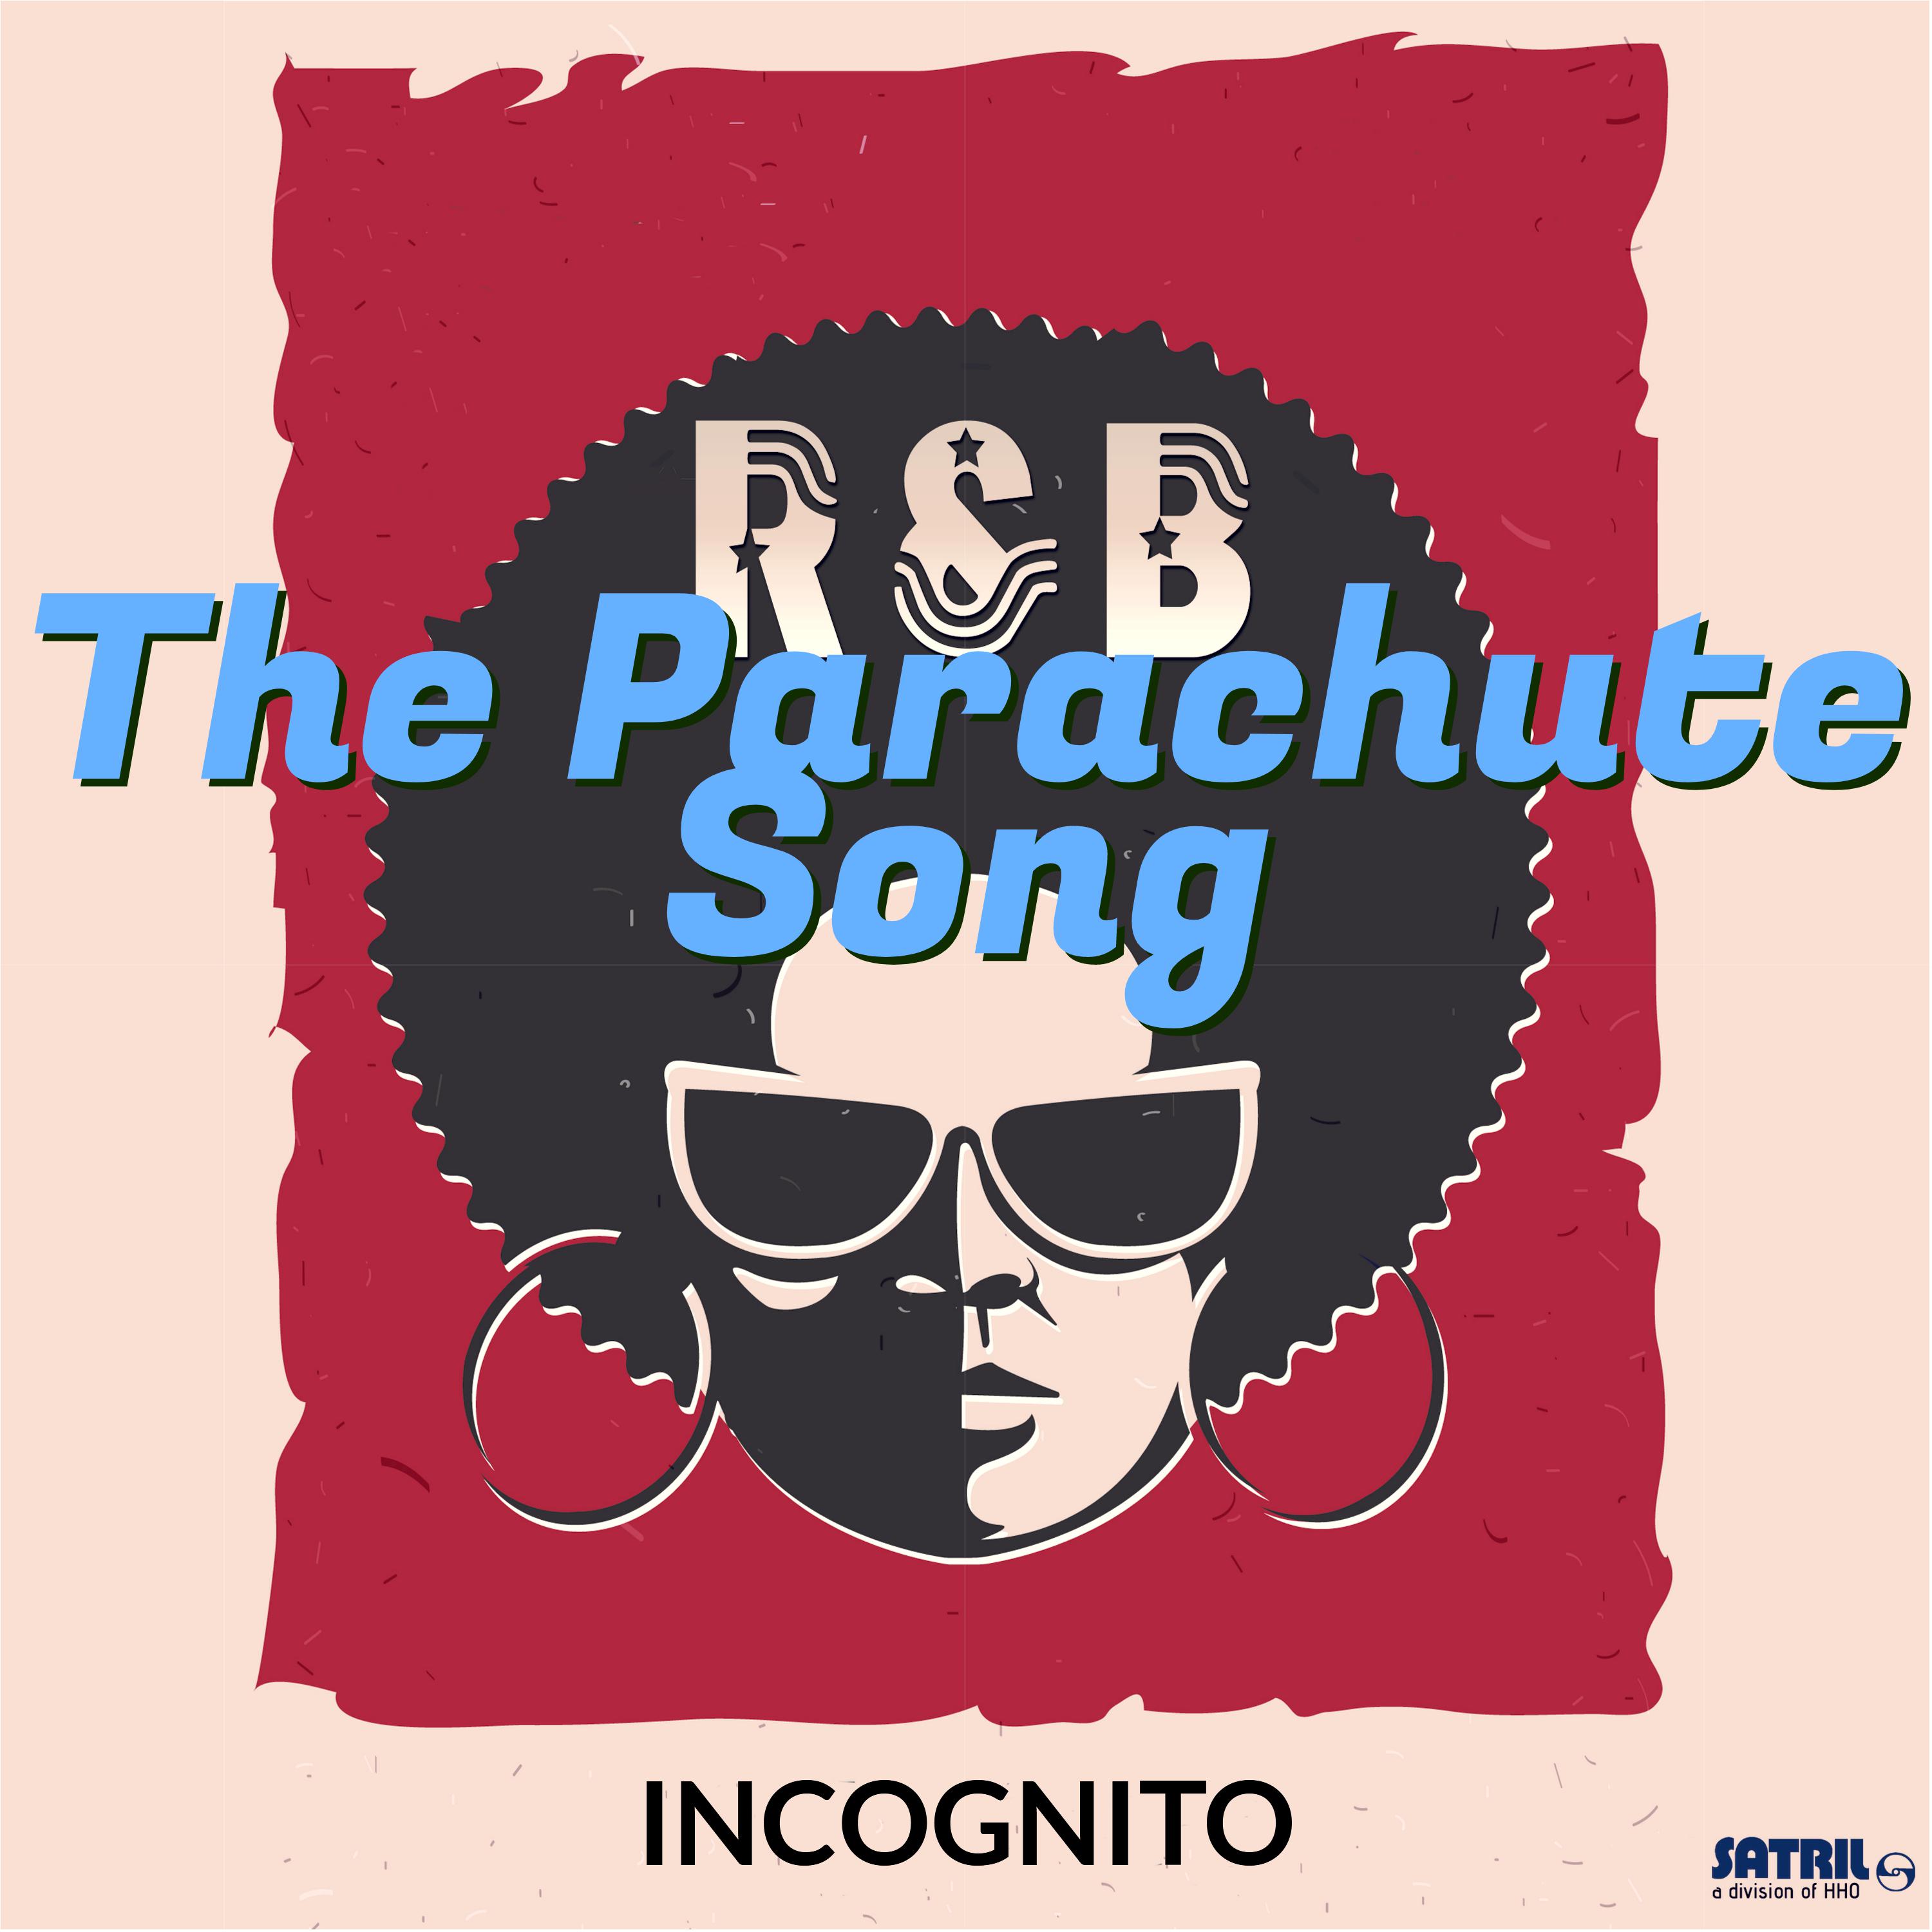 The Parachute Song